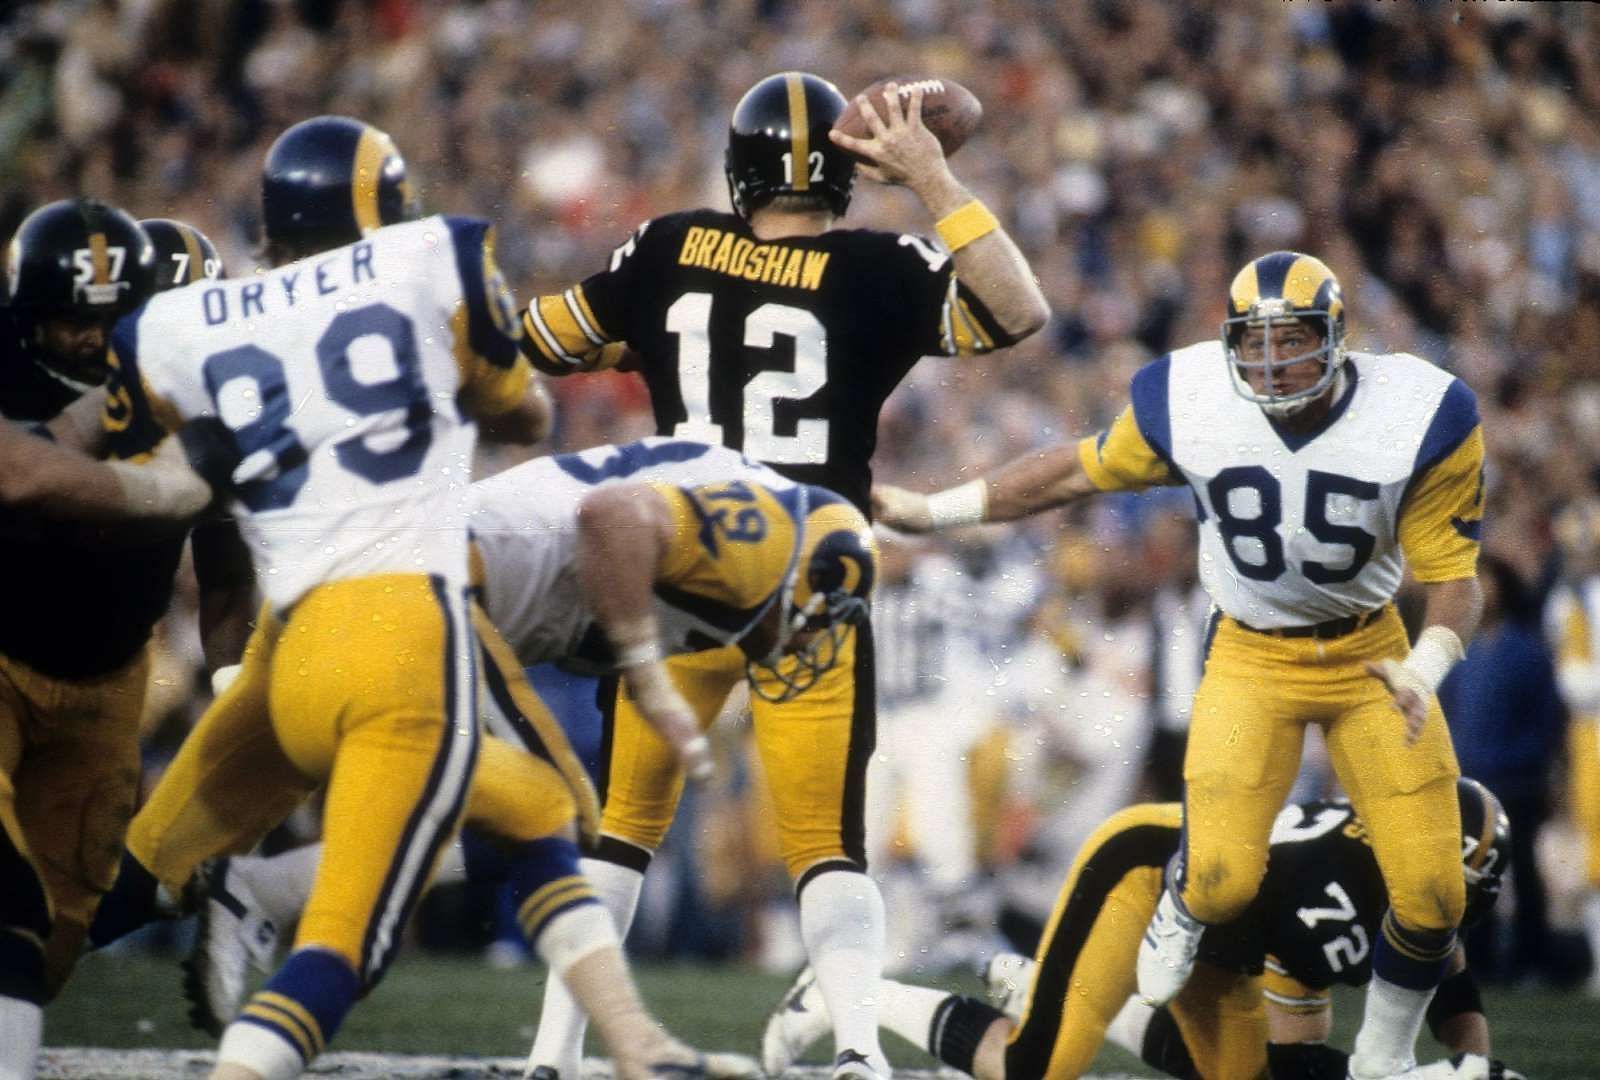 Terry Bradshaw throwing a pass in Super Bowl XIV